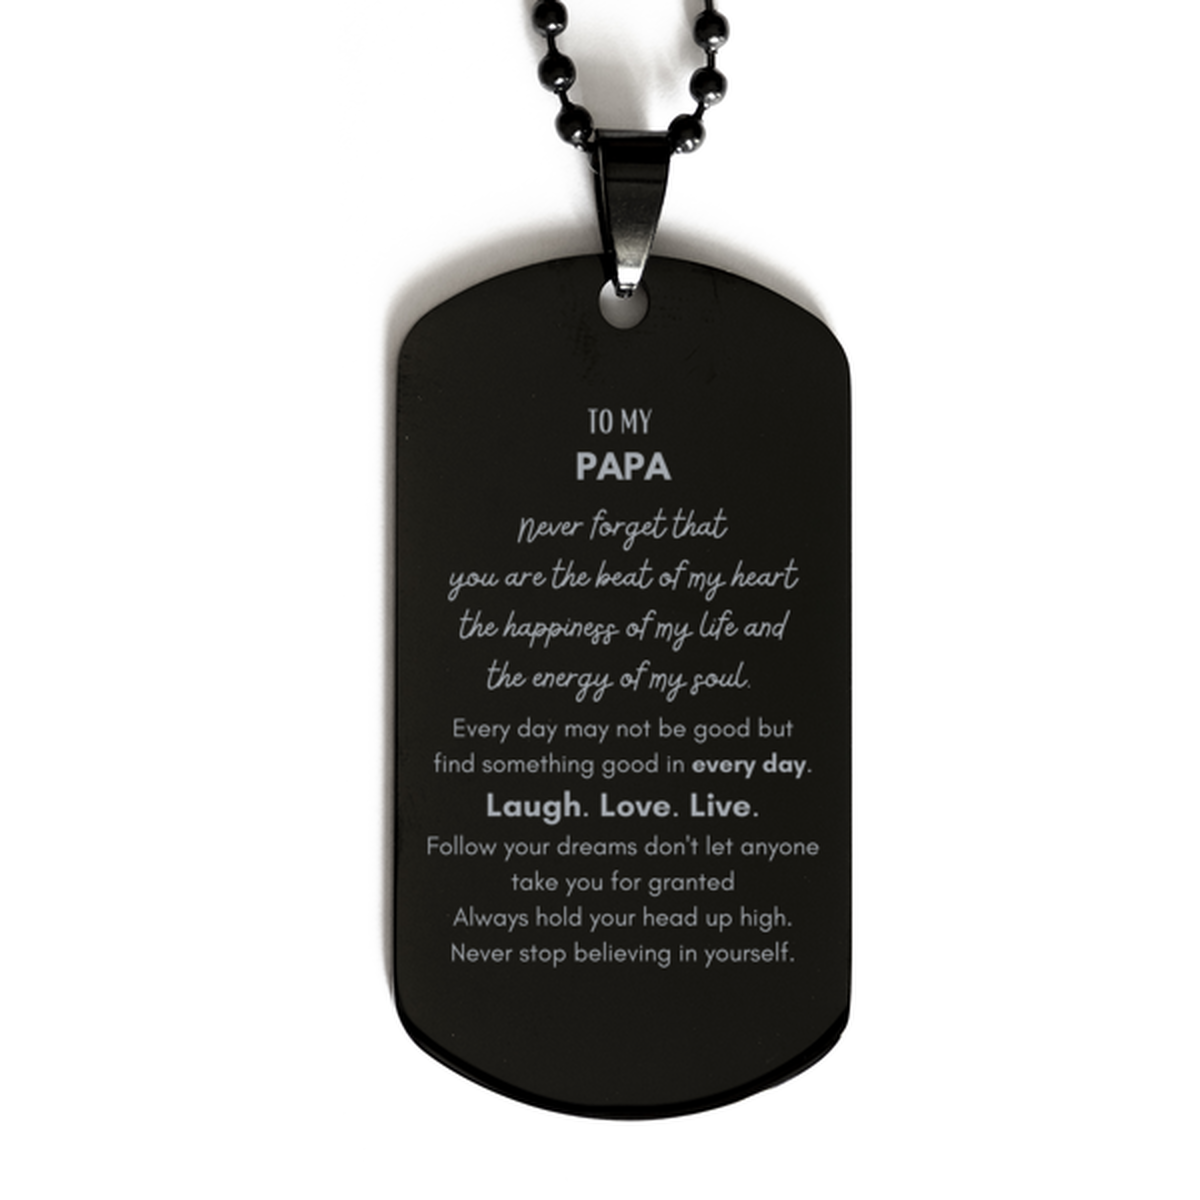 To My Papa Dogtag Gifts, Christmas Papa Black Dog Tag Present, Birthday Unique Motivational For Papa, To My Papa Never forget that you are the beat of my heart the happiness of my life and the energy of my soul